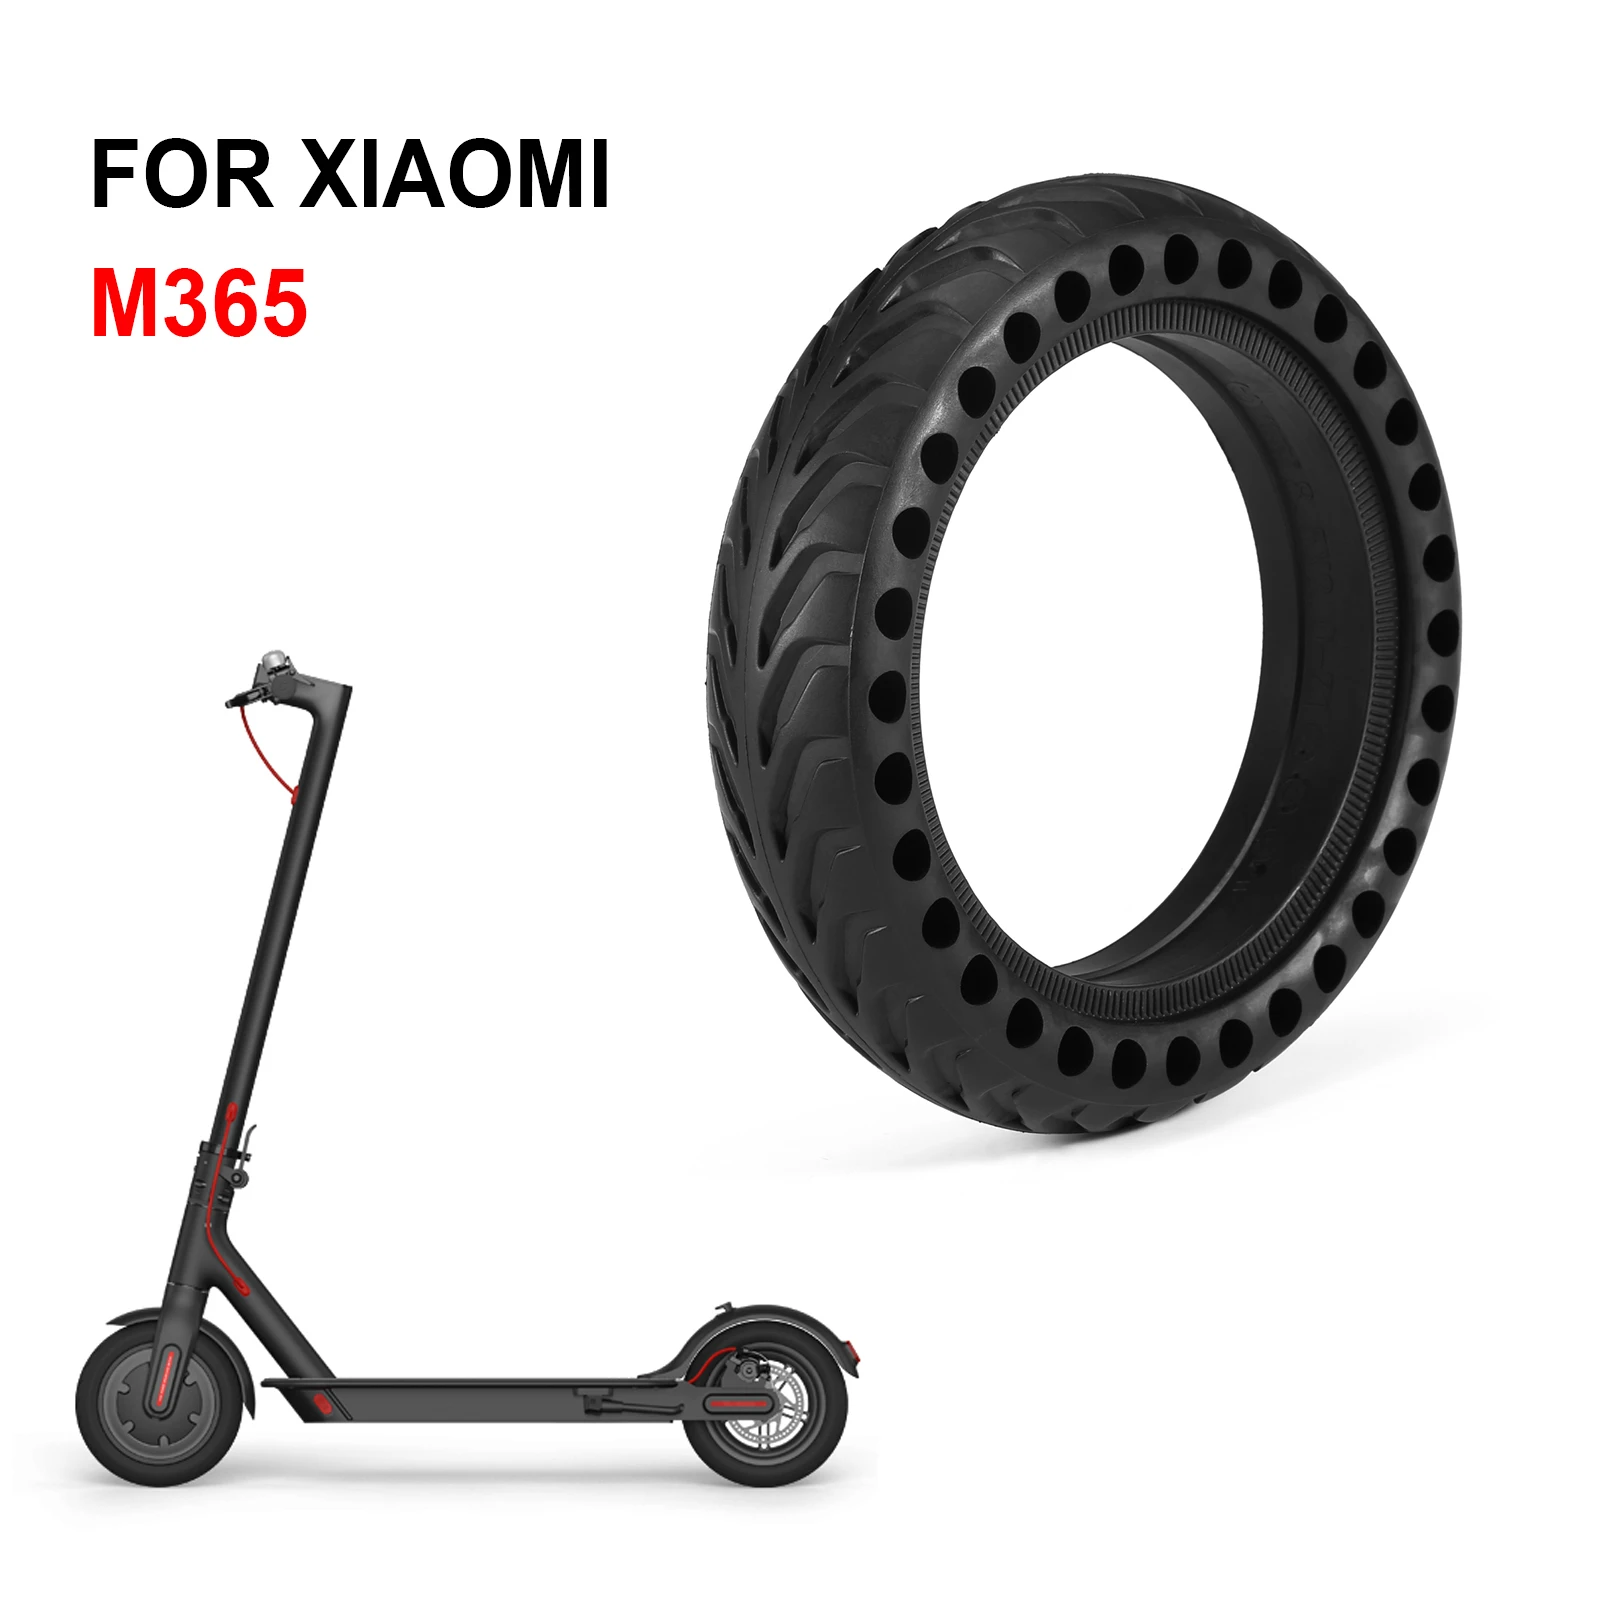 8.5" Explosion-proof Solid Tyre Tire Wheel for Xiaomi M365/Pro Electric Scooter